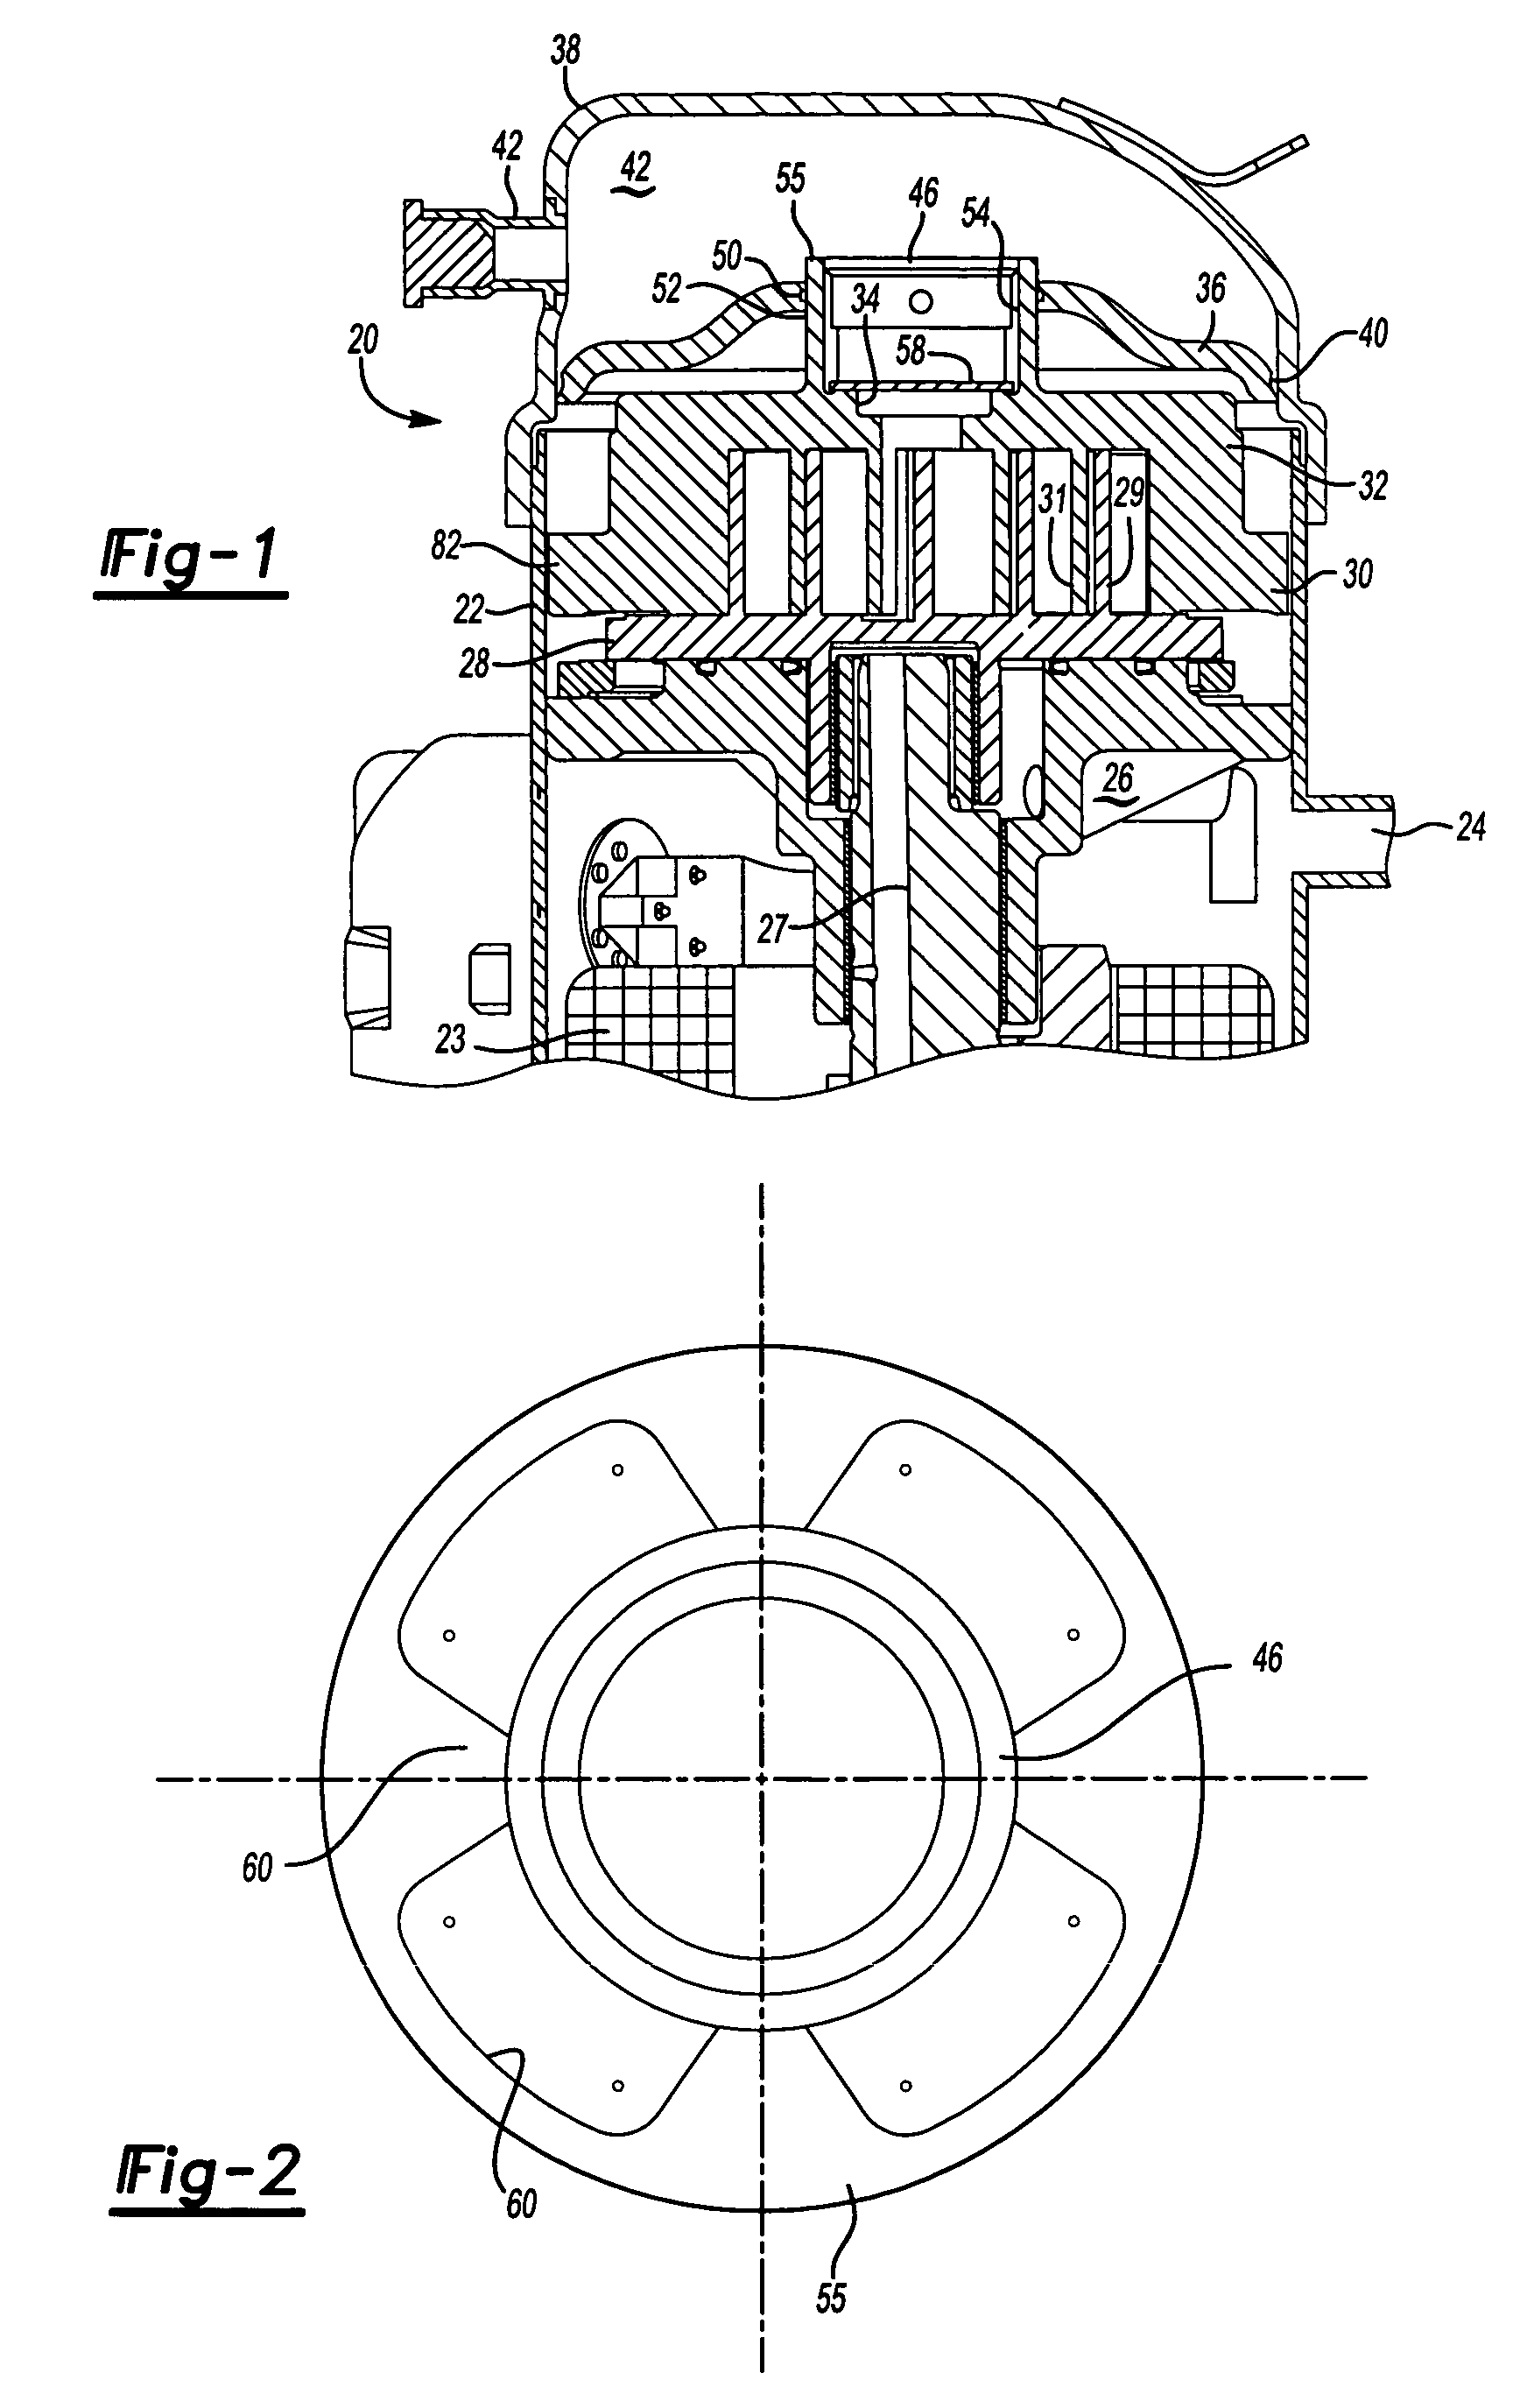 Discharge valve structures for a scroll compressor having a separator plate